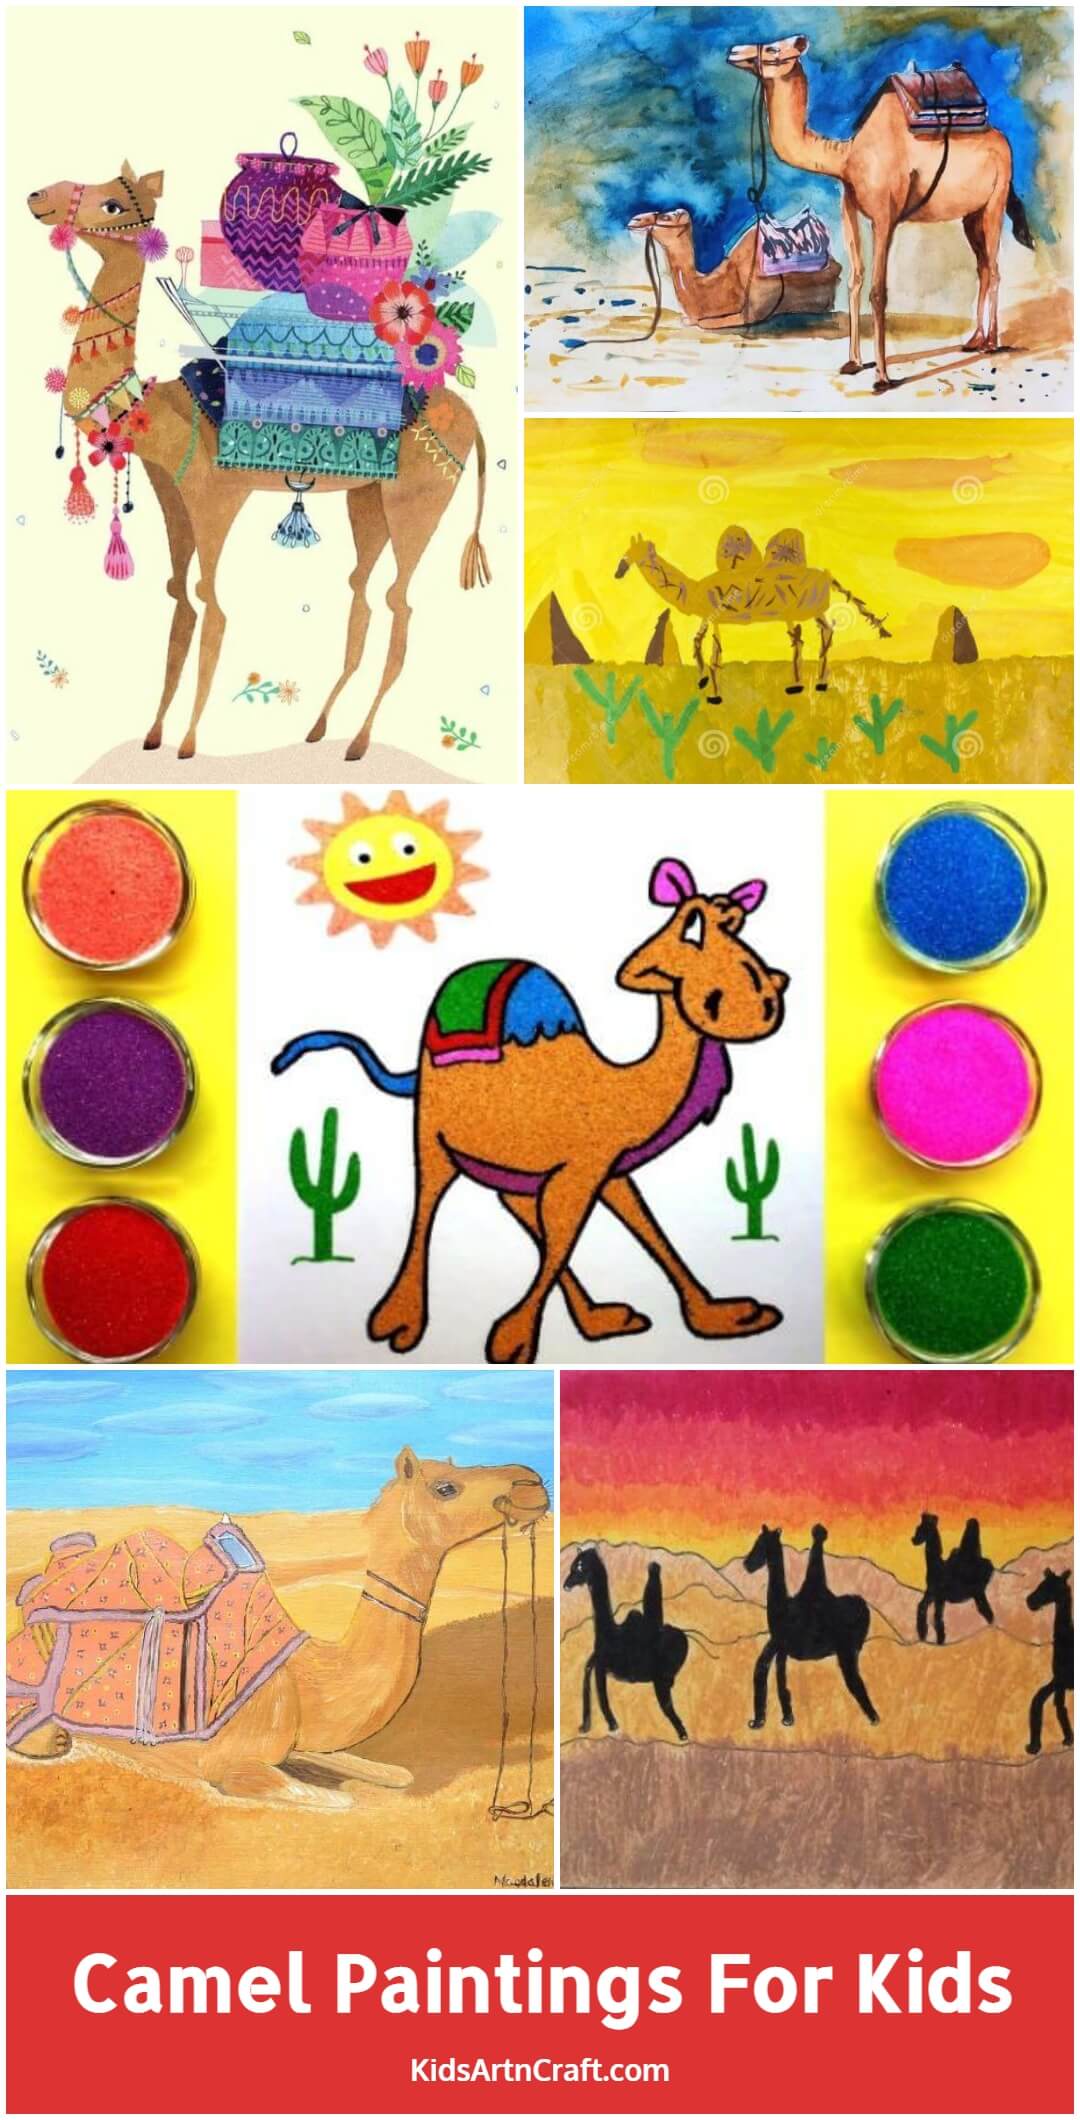 Camel Paintings For Kids